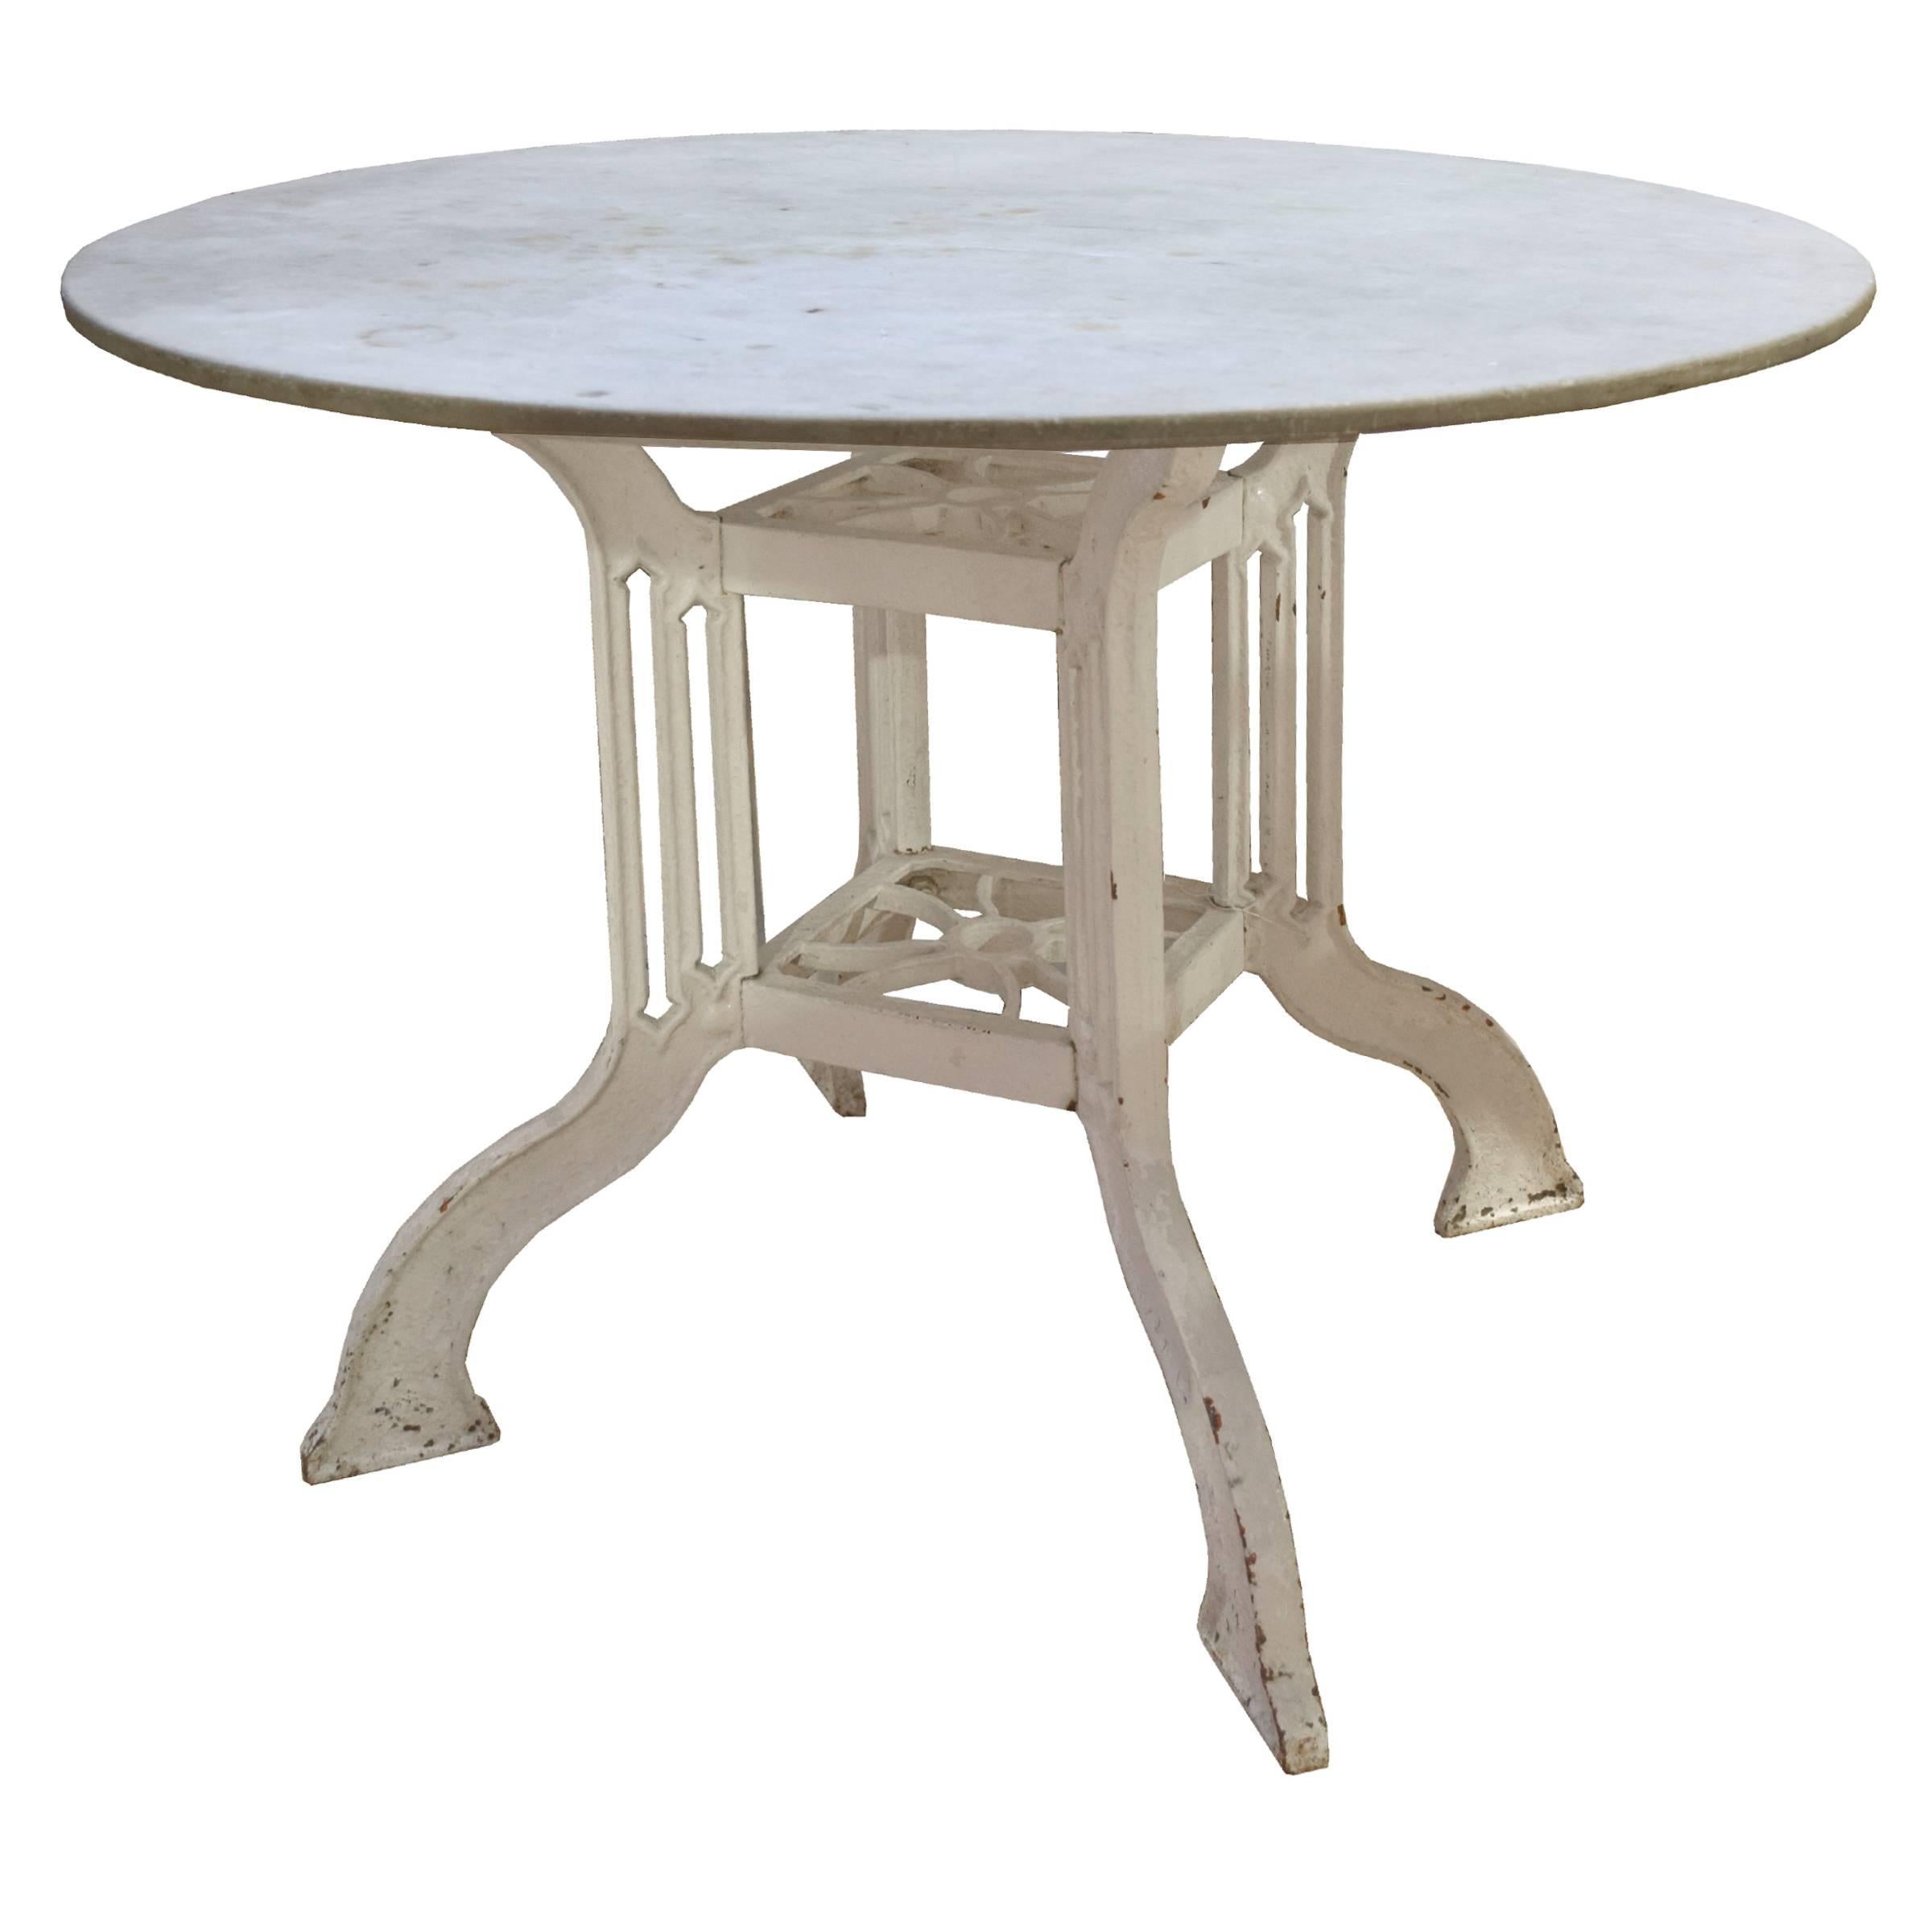 A lovely French café table with a painted iron table base with a round marble top, circa 1900.
